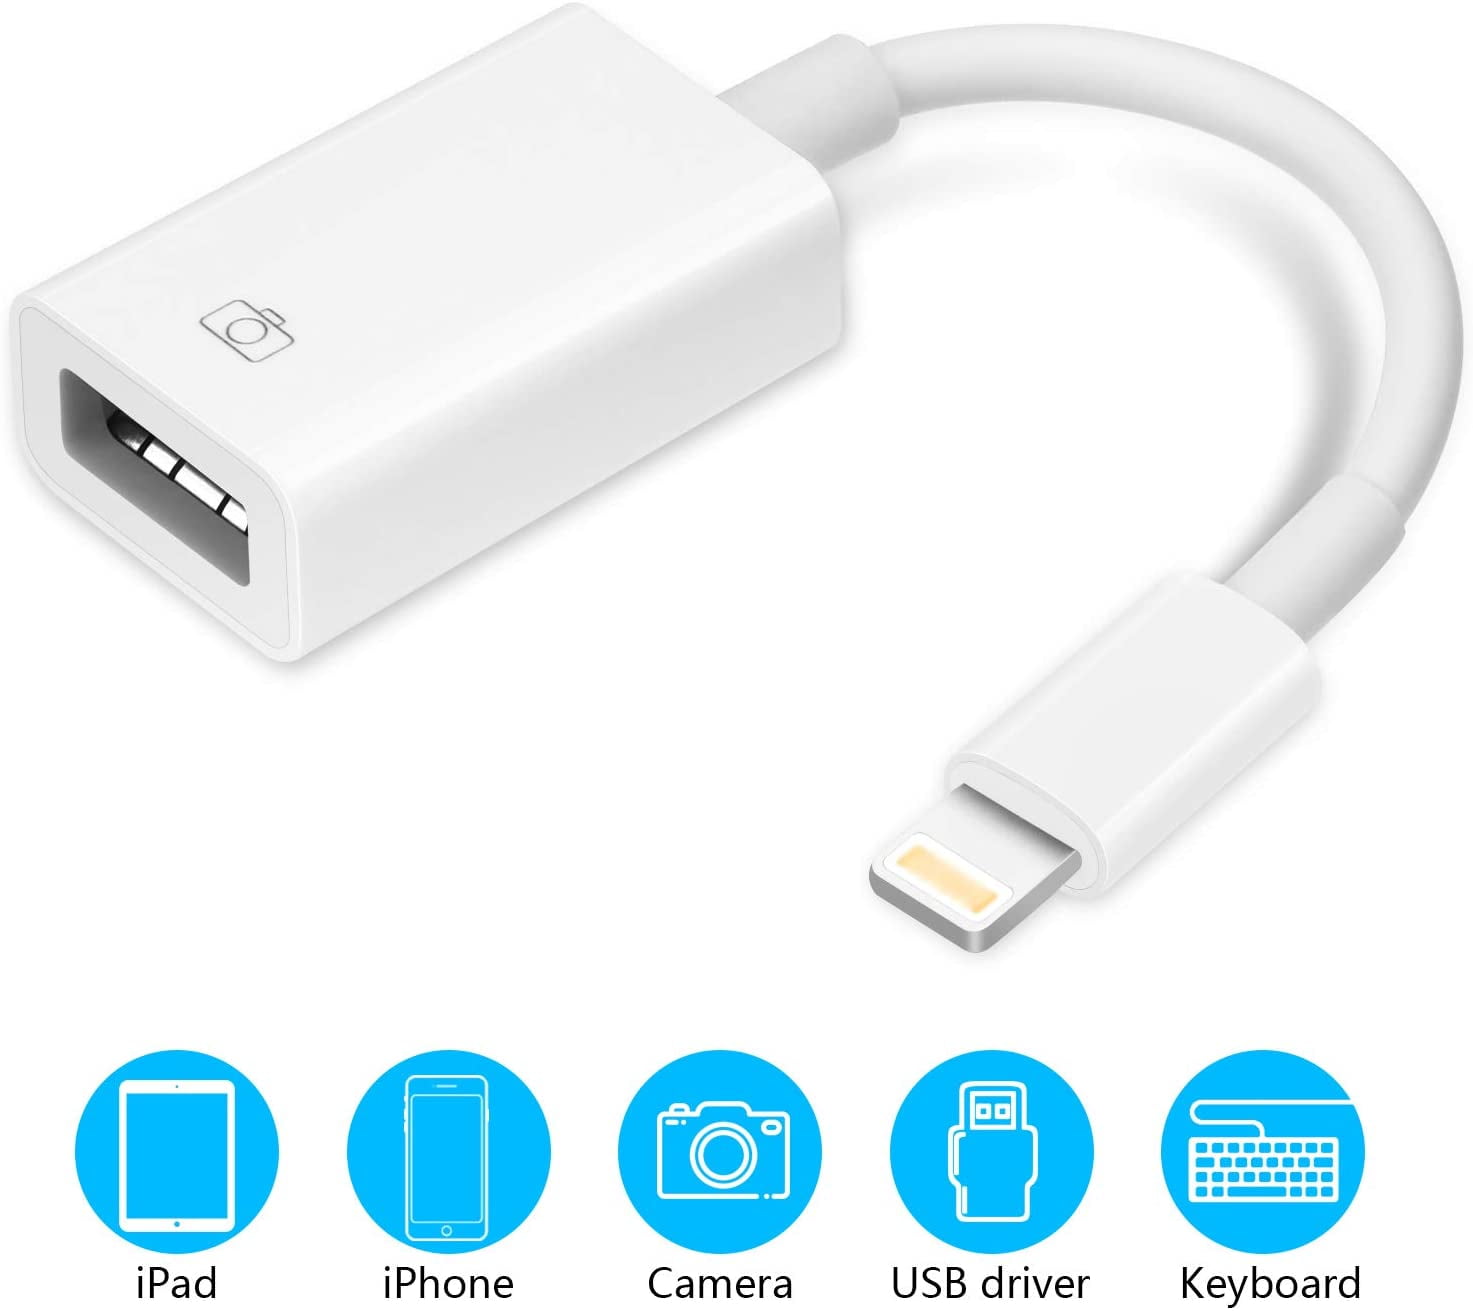 Lightning to USB Camera Adapter USB 3.0 OTG Cable Adapter with iPhone/iPad,USB Female Connect Card Reader,U Disk,Keyboard,Mouse,USB Flash Drive-Plug&Play - Walmart.com